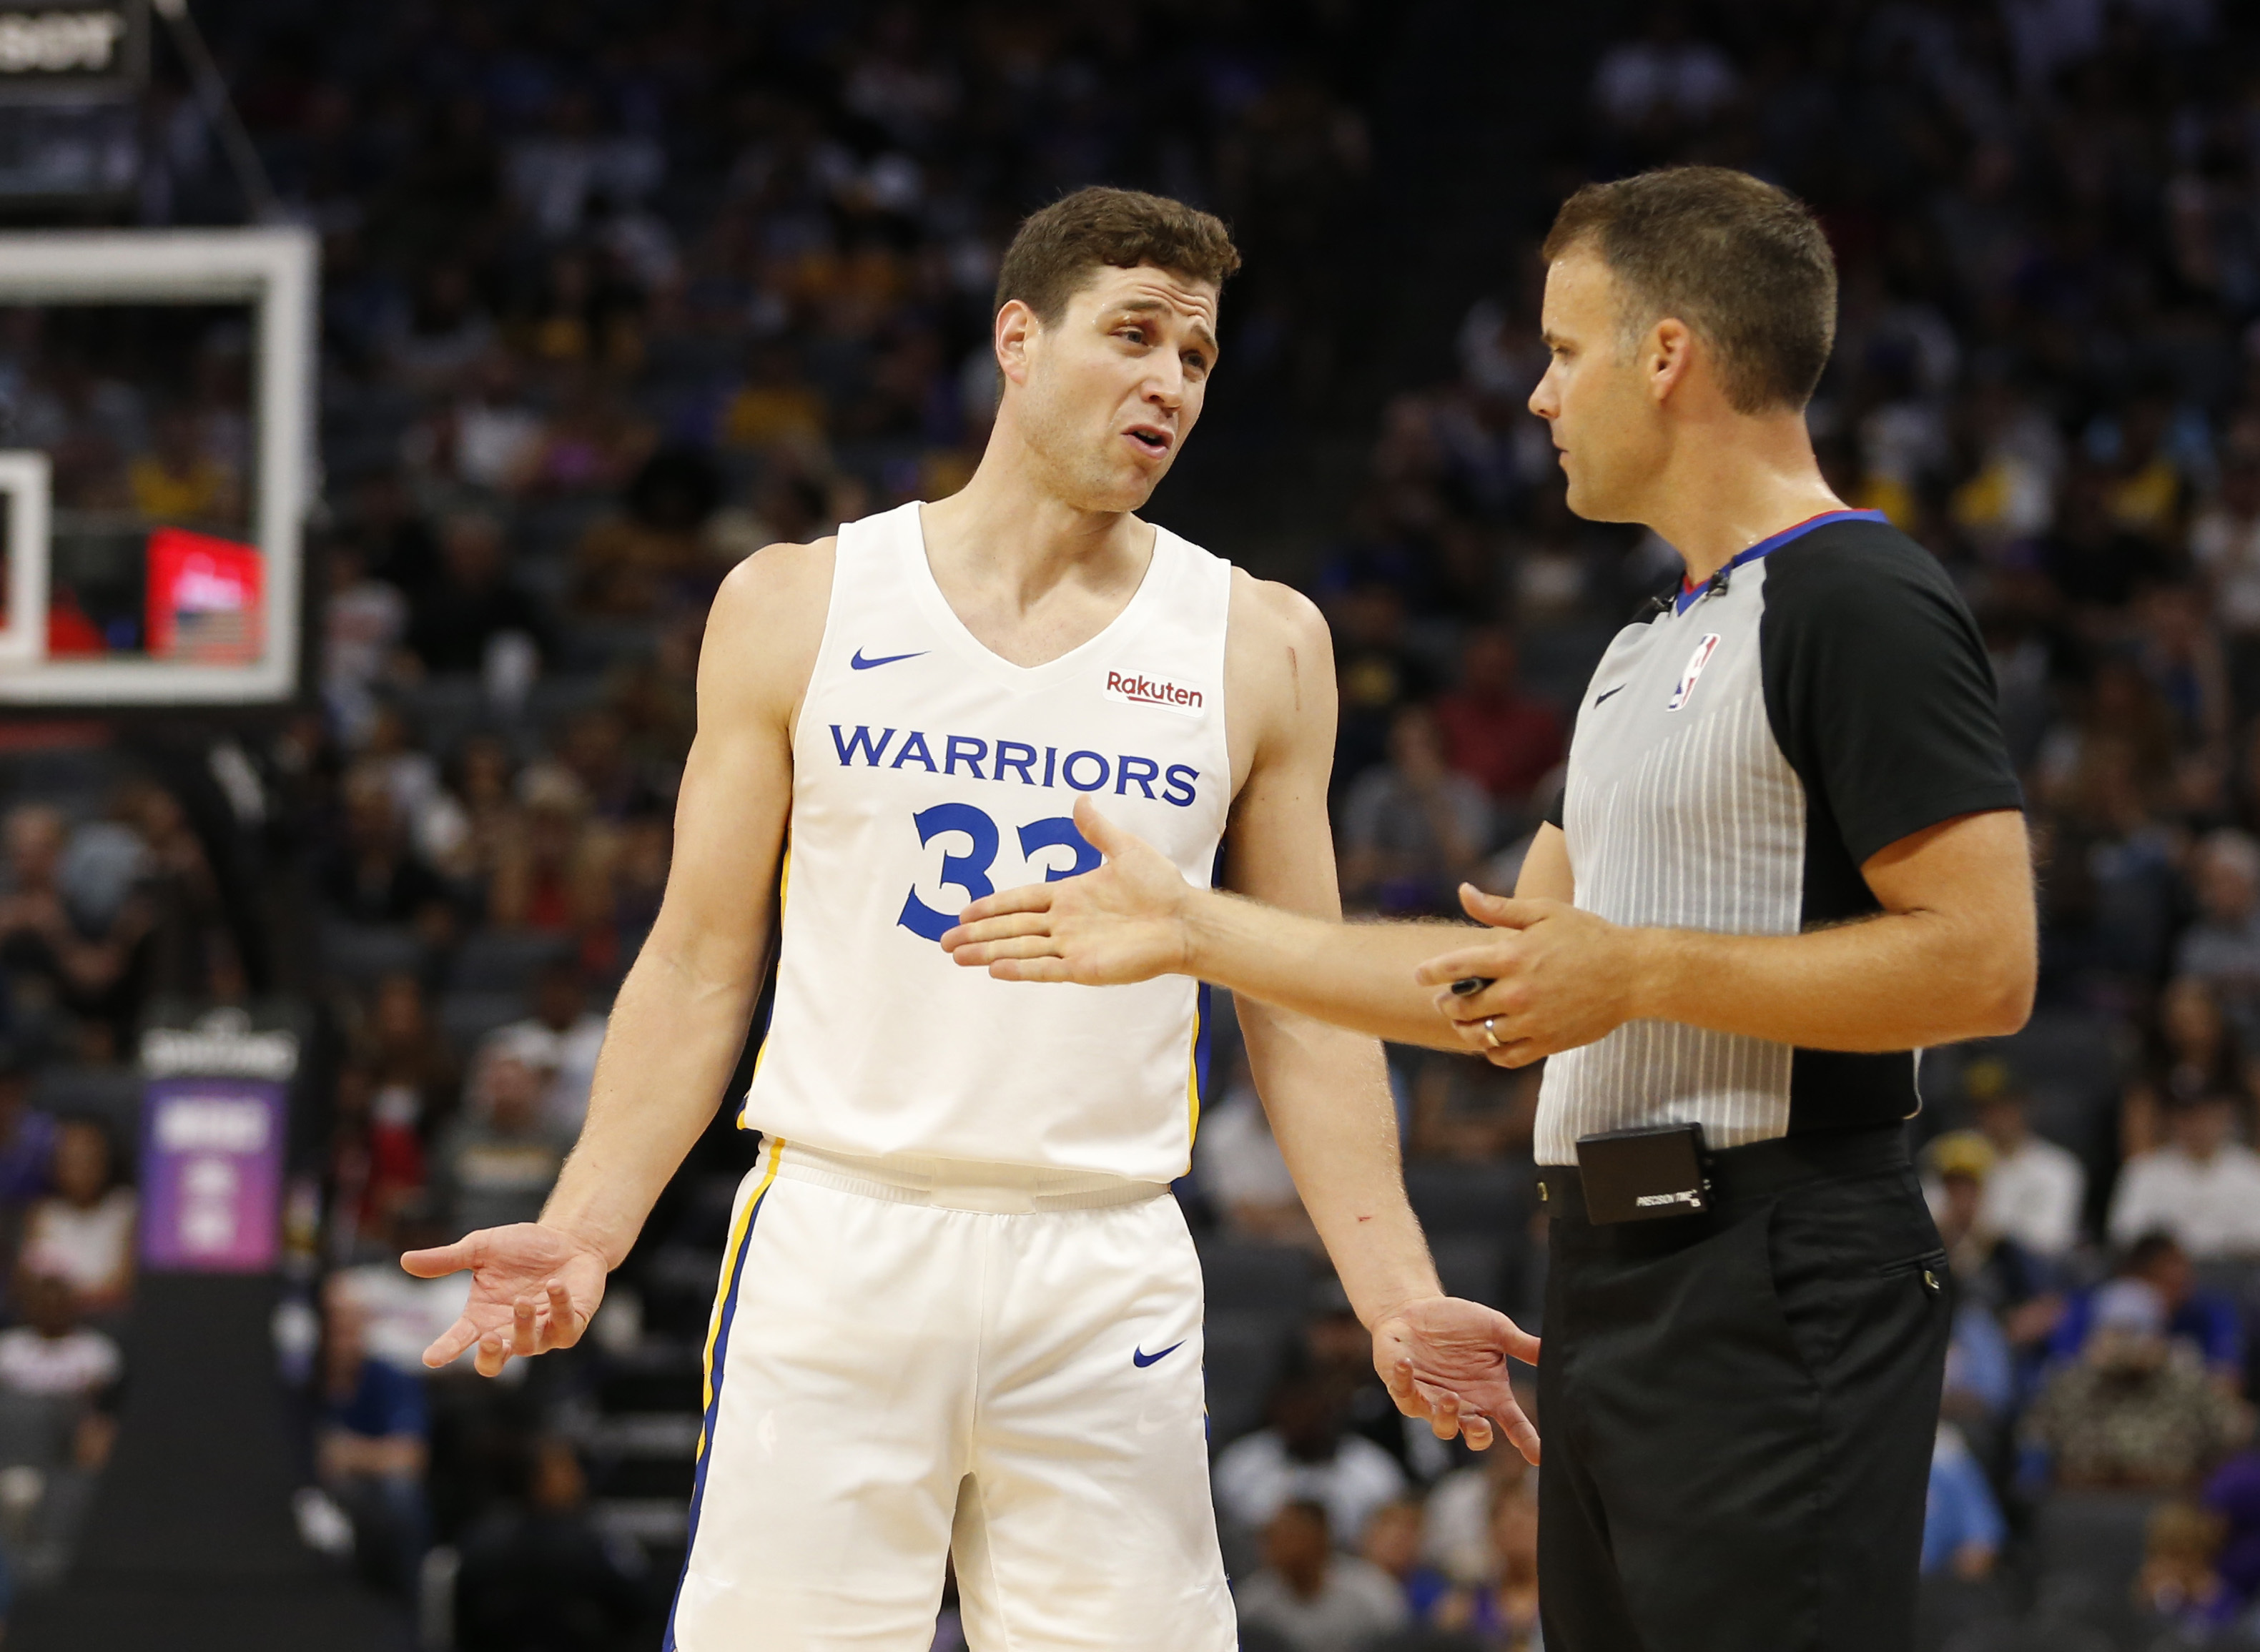 Jimmer Fredette: Bio, Contract, & Stats